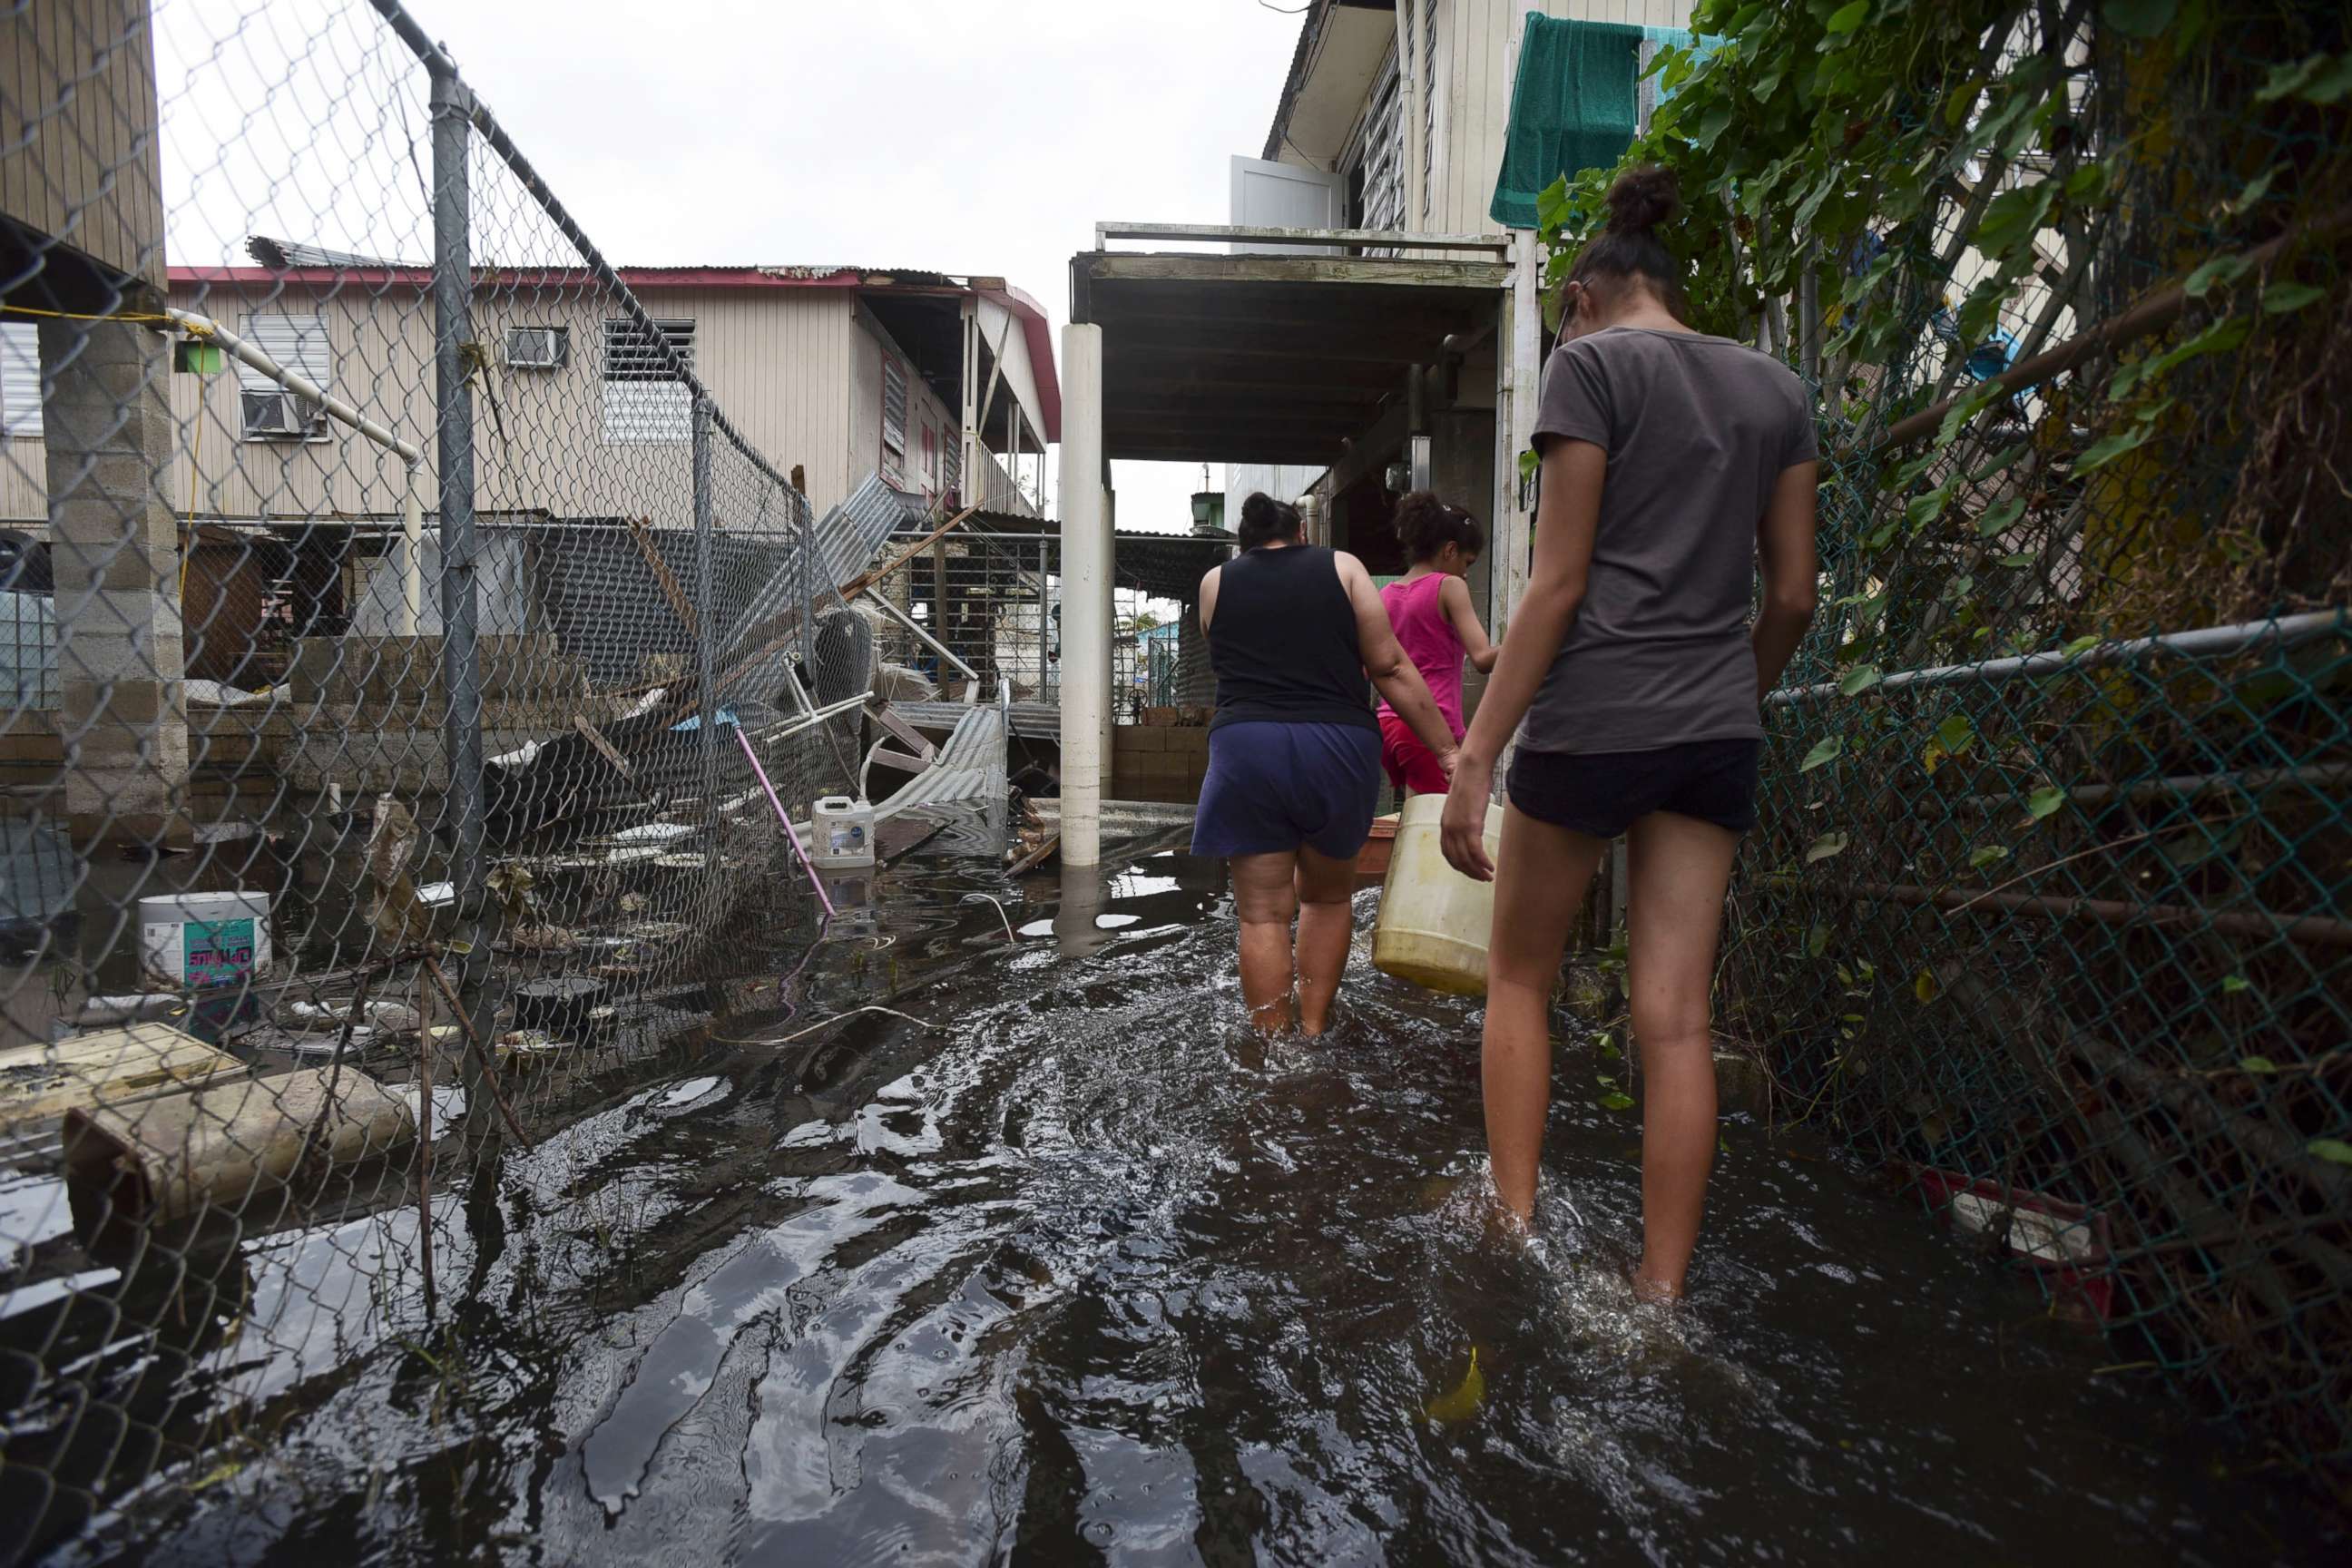 PHOTO: Residents wade through a flooded area in the aftermath of Hurricane Maria, in Catano, Puerto Rico, Sept. 27, 2017. 